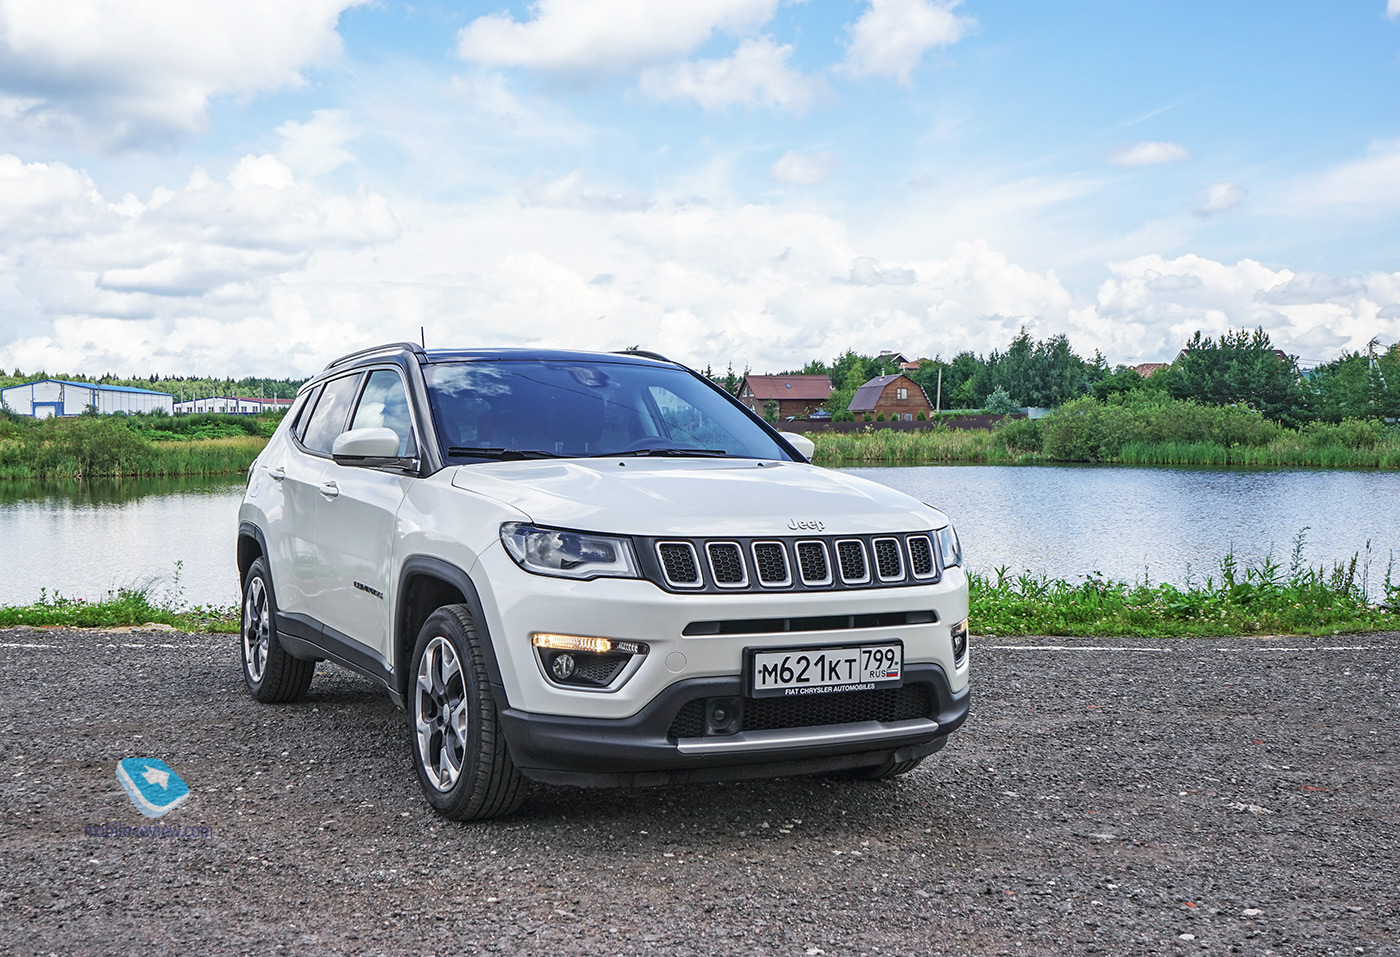 Jeep Compass test. American crossover